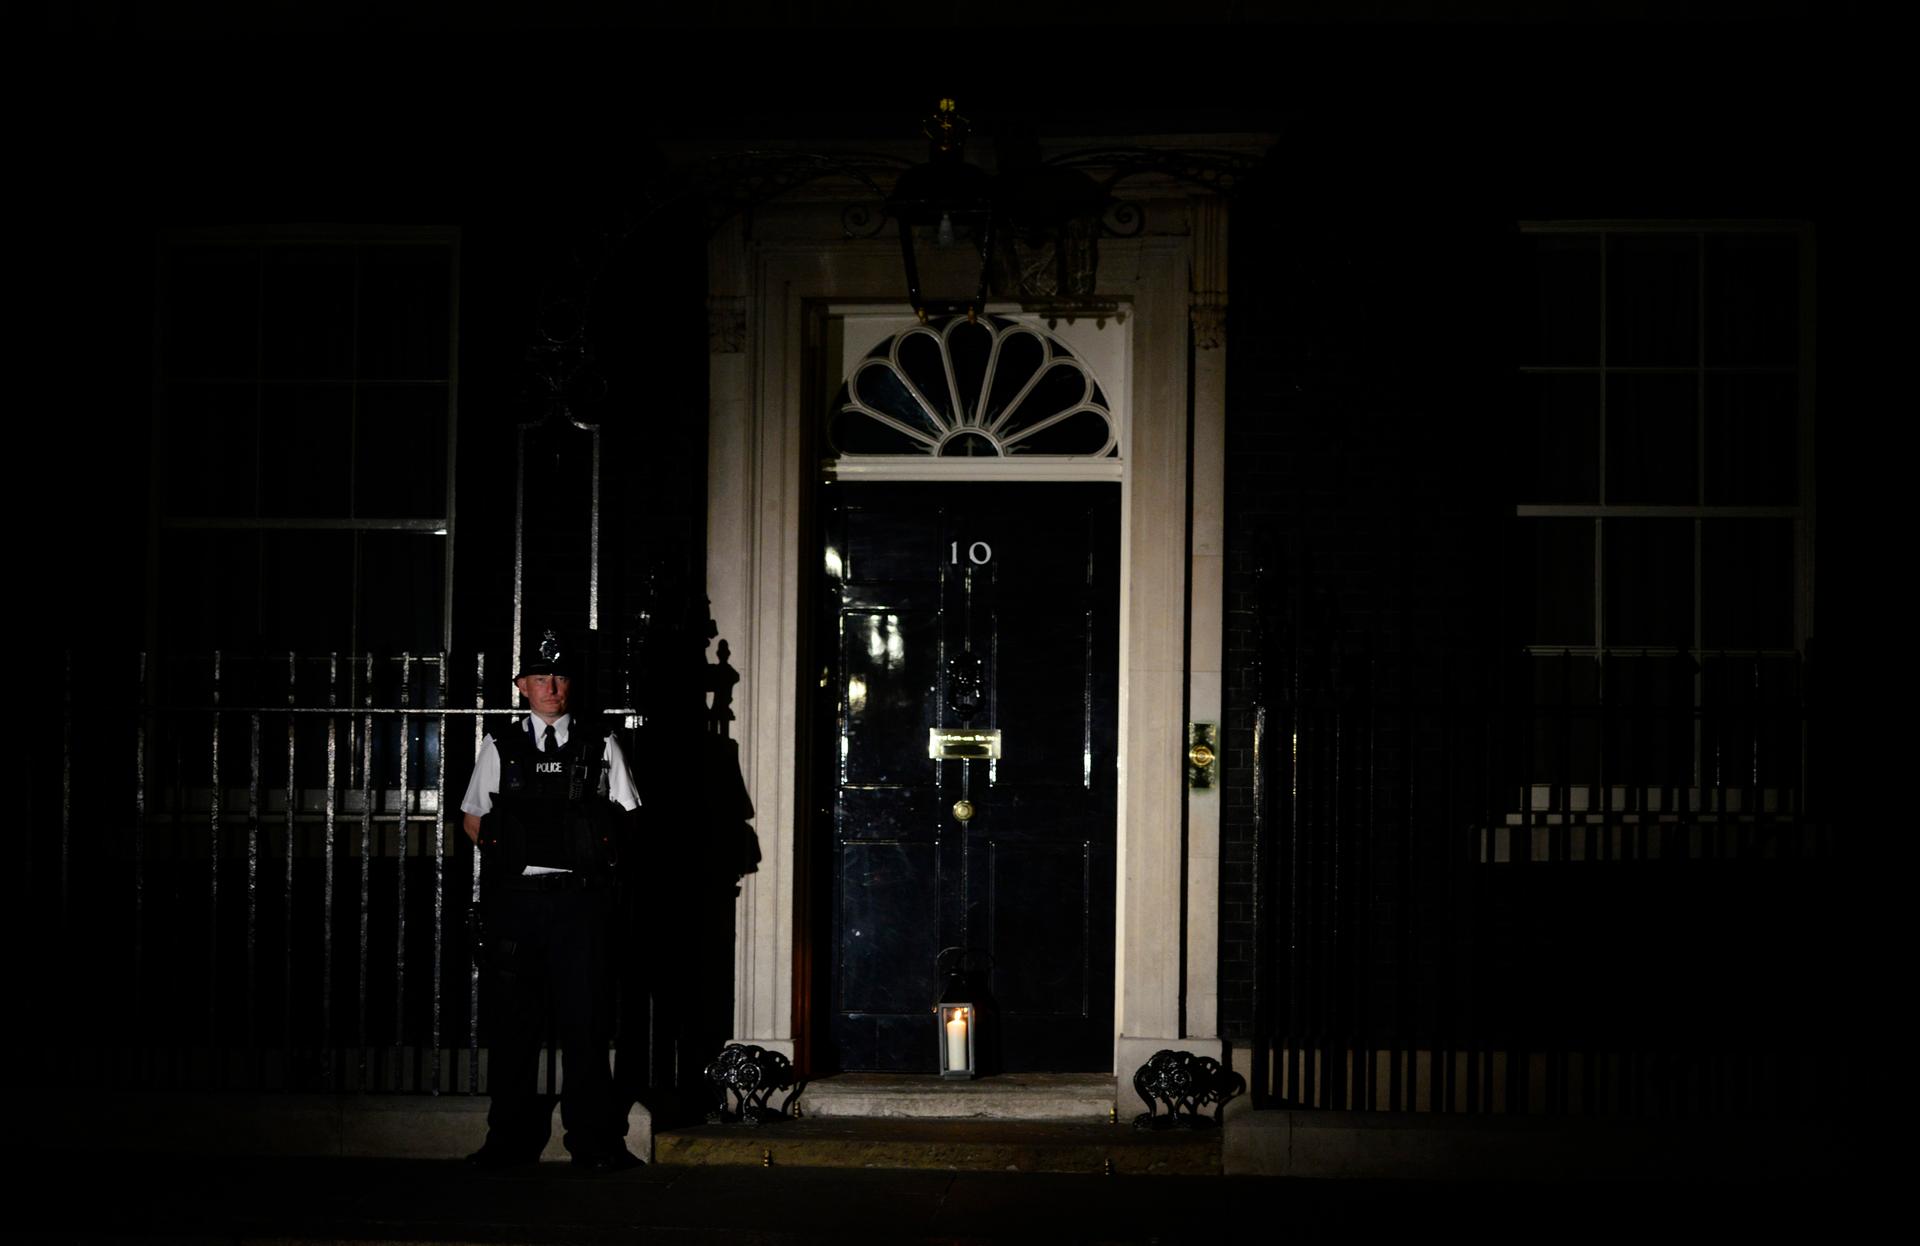 A policeman stands guard as a lantern is placed at the front door of Number 10 Downing Street during "Lights Out", as part of commemorations to mark the 100th anniversary of the outbreak of World War I on August 4, 2014.